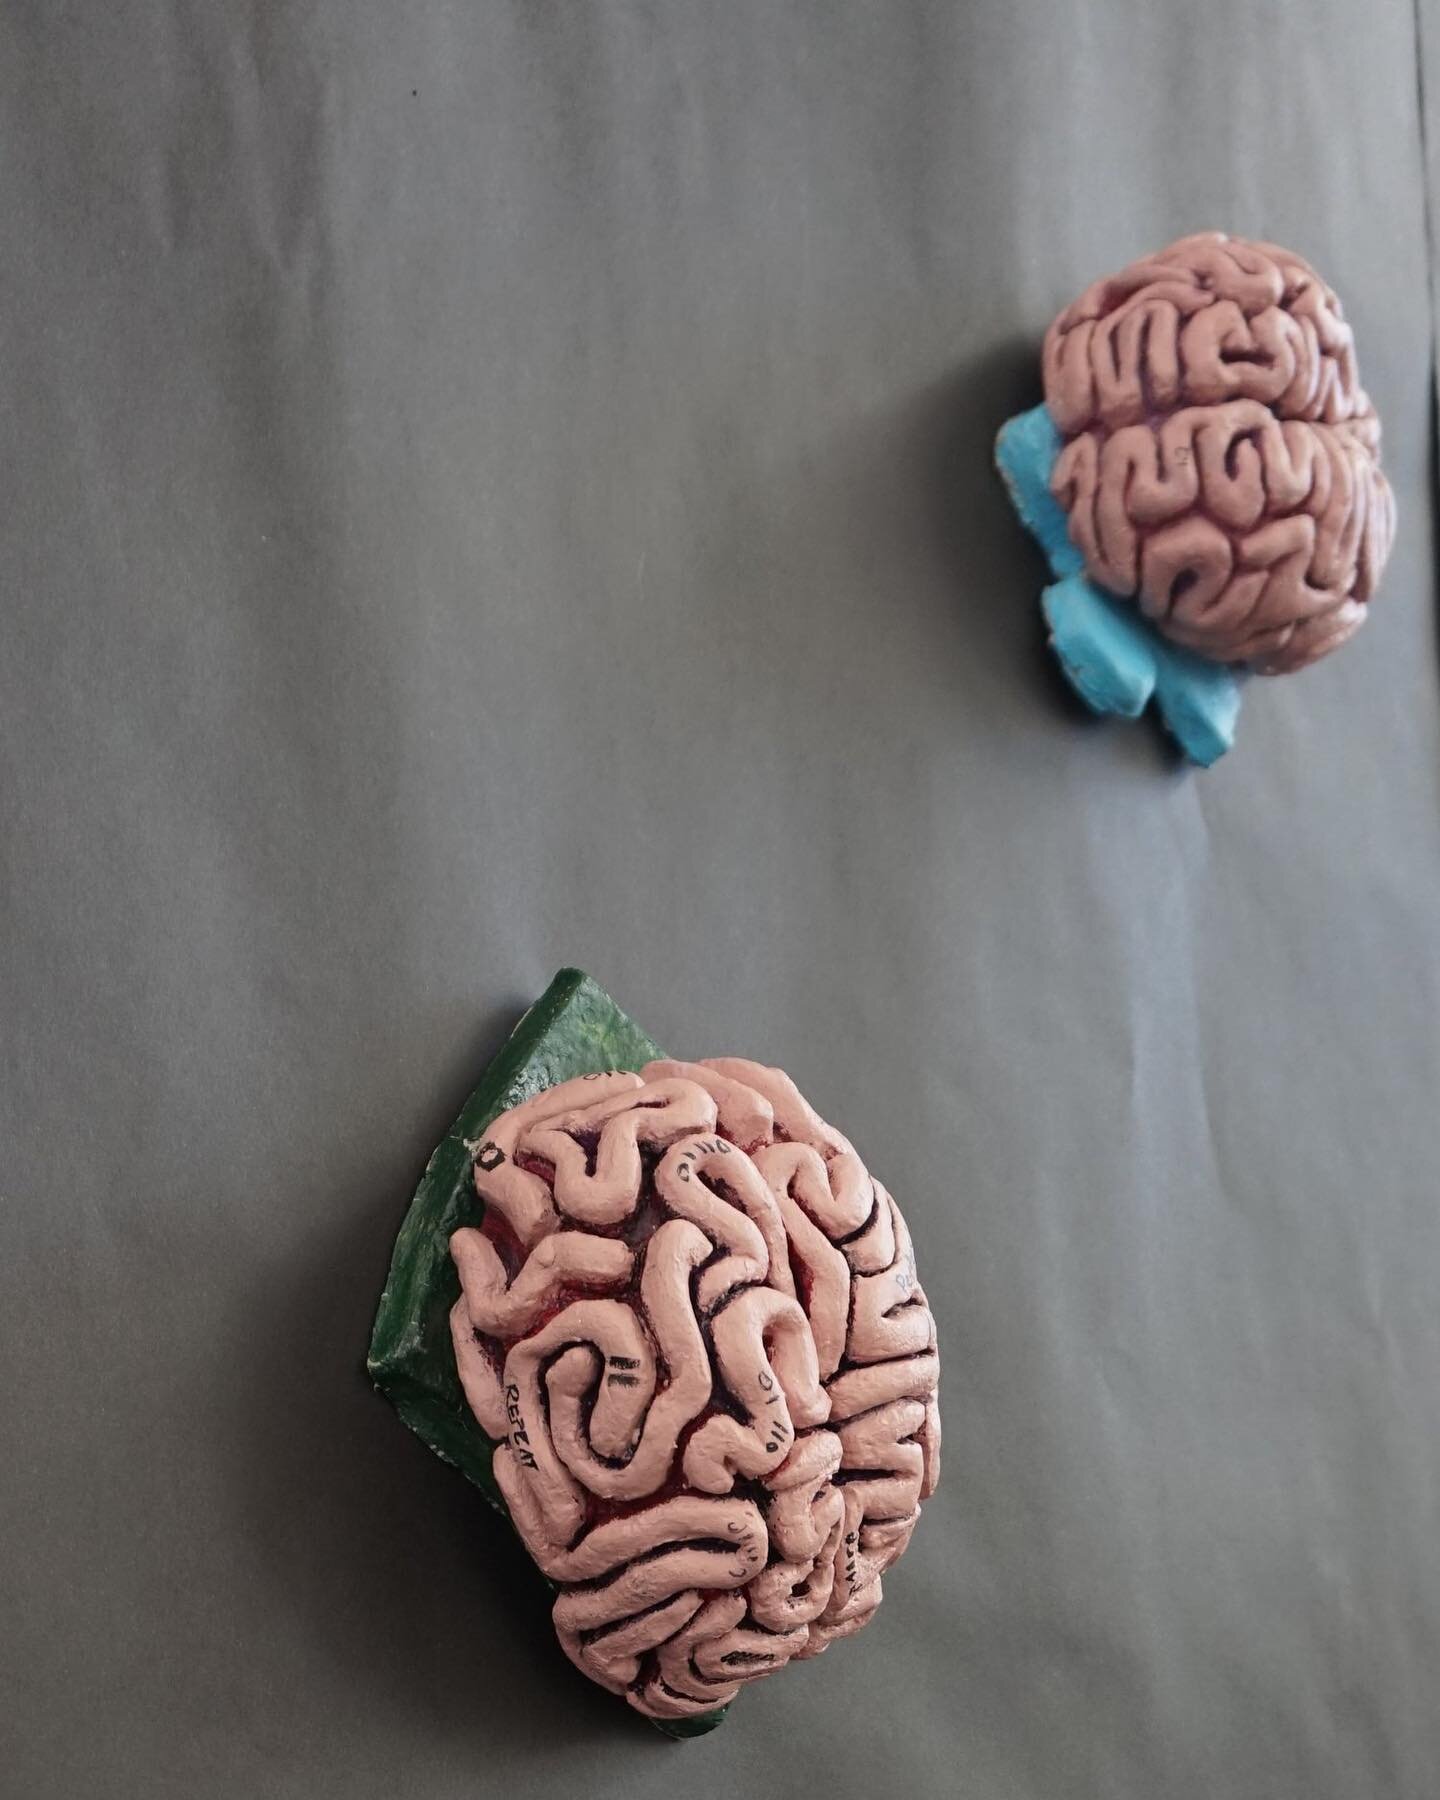 My Decaying Mind
  A throwback to my first art series &ldquo;Forever Continuously Infinite.&rdquo; These 3 brains were a representative of my mind decaying through the stress put on myself to achieve perfection. This is represented in the change of c